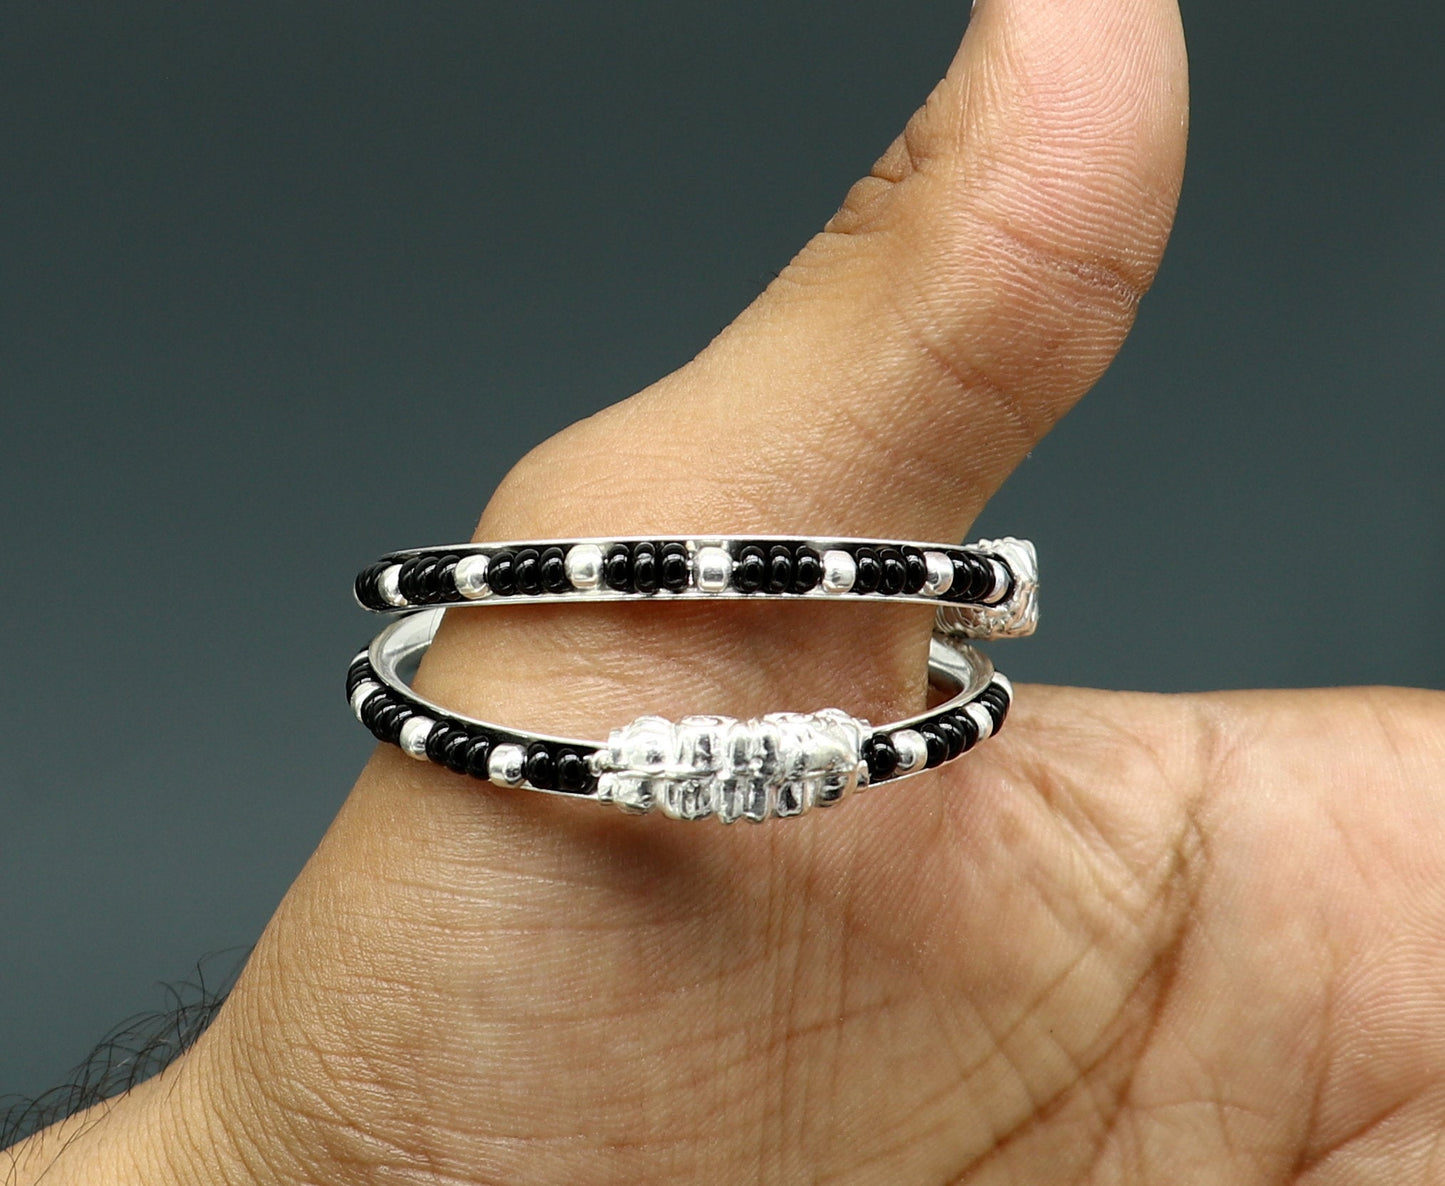 Trendy style sterling silver baby bangle nazariya, black evil eye bangle for new born baby kids, fabulous baby jewelry from india nbbk226 - TRIBAL ORNAMENTS